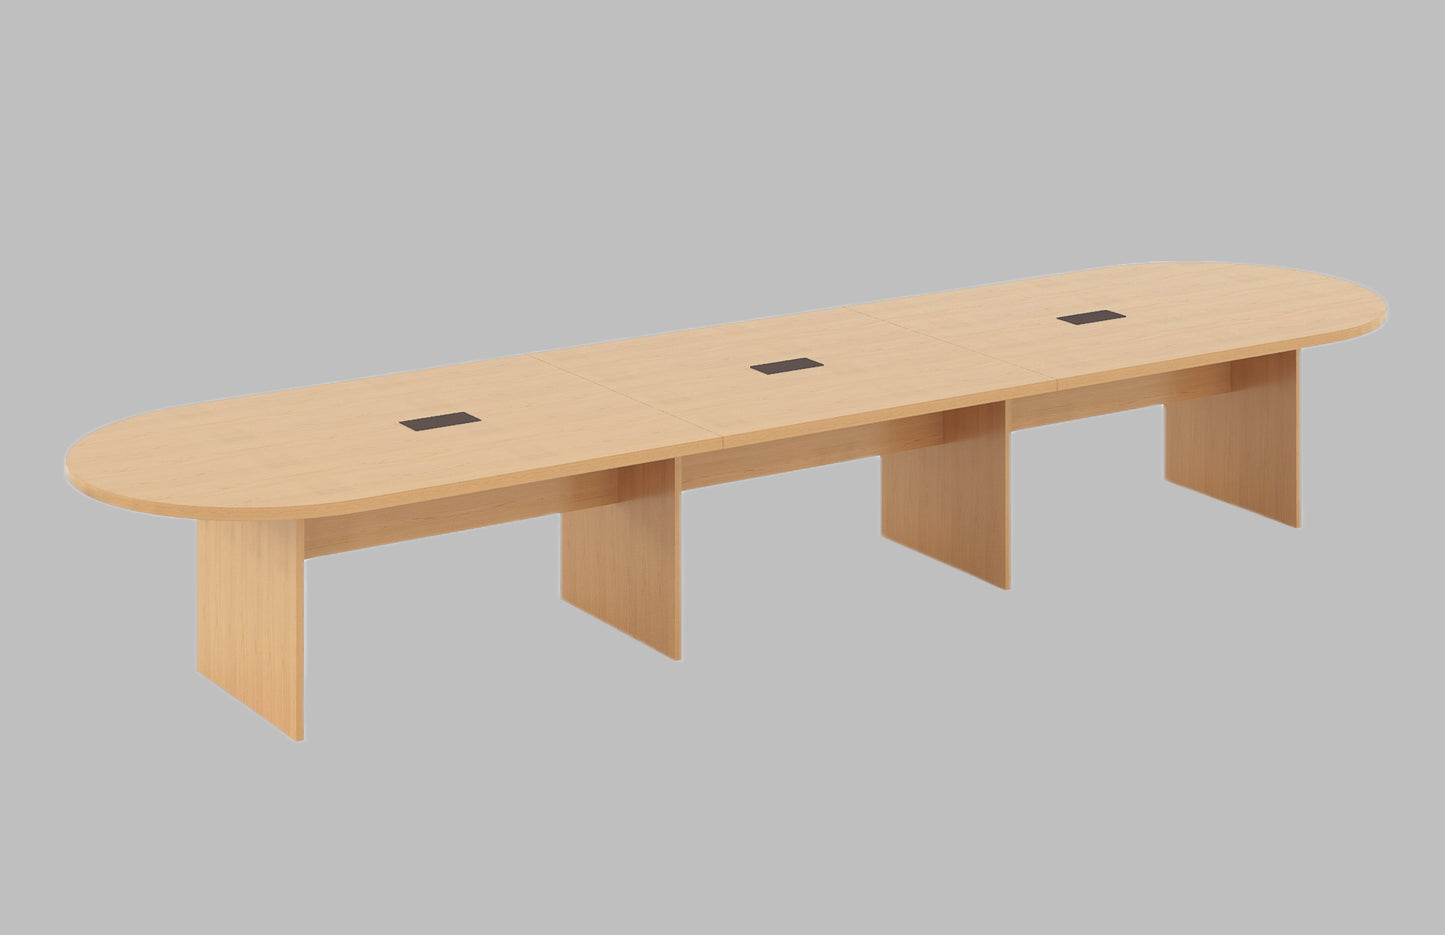 16FT Maple racetrack shaped table